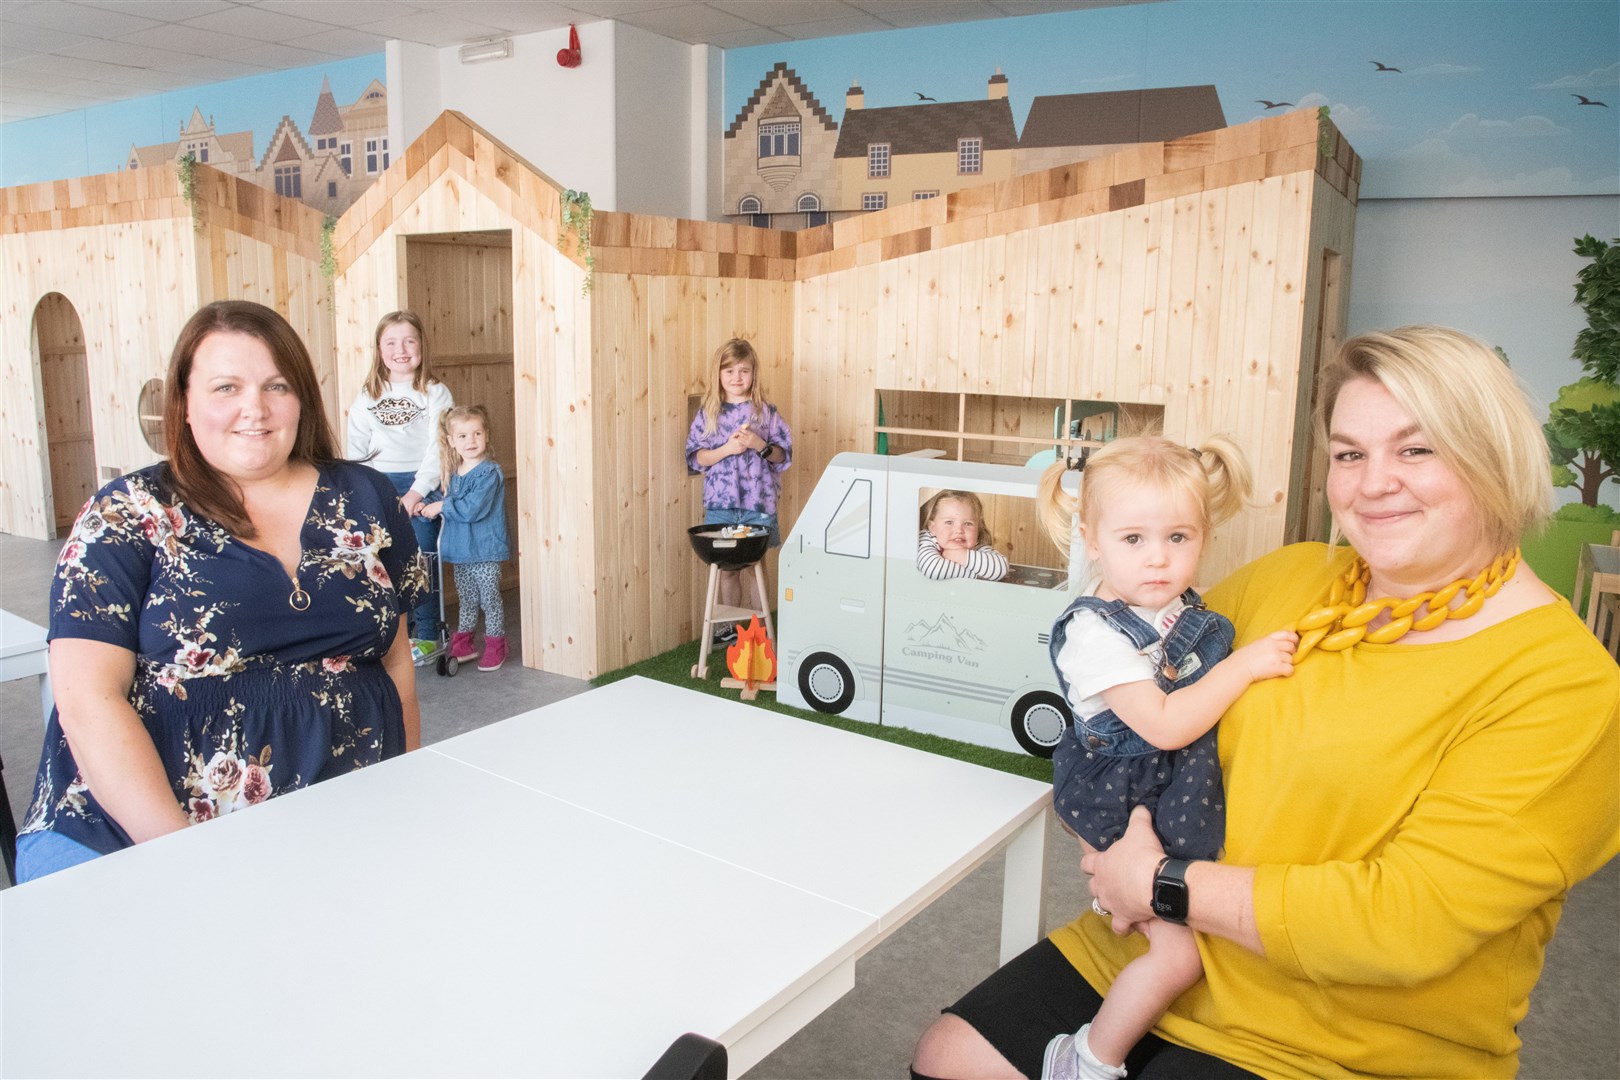 Child's play: Toy Toon will open in Elgin High Street this week by lifelong friends Jacqueline Main and Katy Larkworthy. Katy is holding her youngest daughter Livi (1). Poppy (7), her eldest daughter, is behind the BBQ, while Willow (3) is in the supermarket with Chloe Main (6). Jacqueline's other daughter, Emma (2), is in the camper van window. Picture: Daniel Forsyth